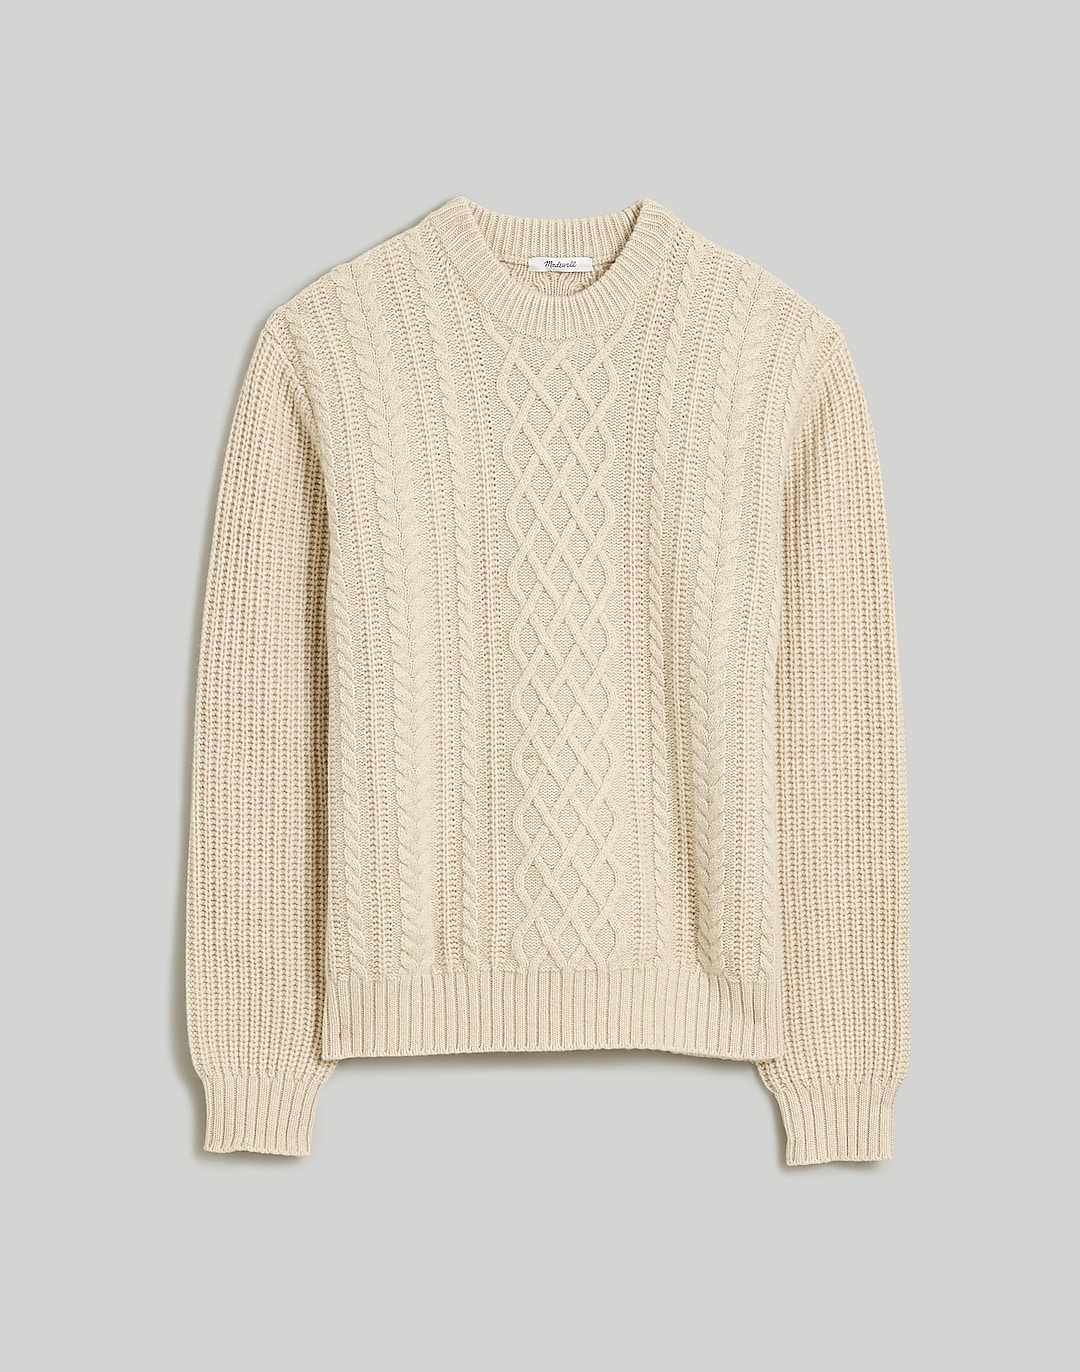 Cabled Crewneck Sweater | Madewell